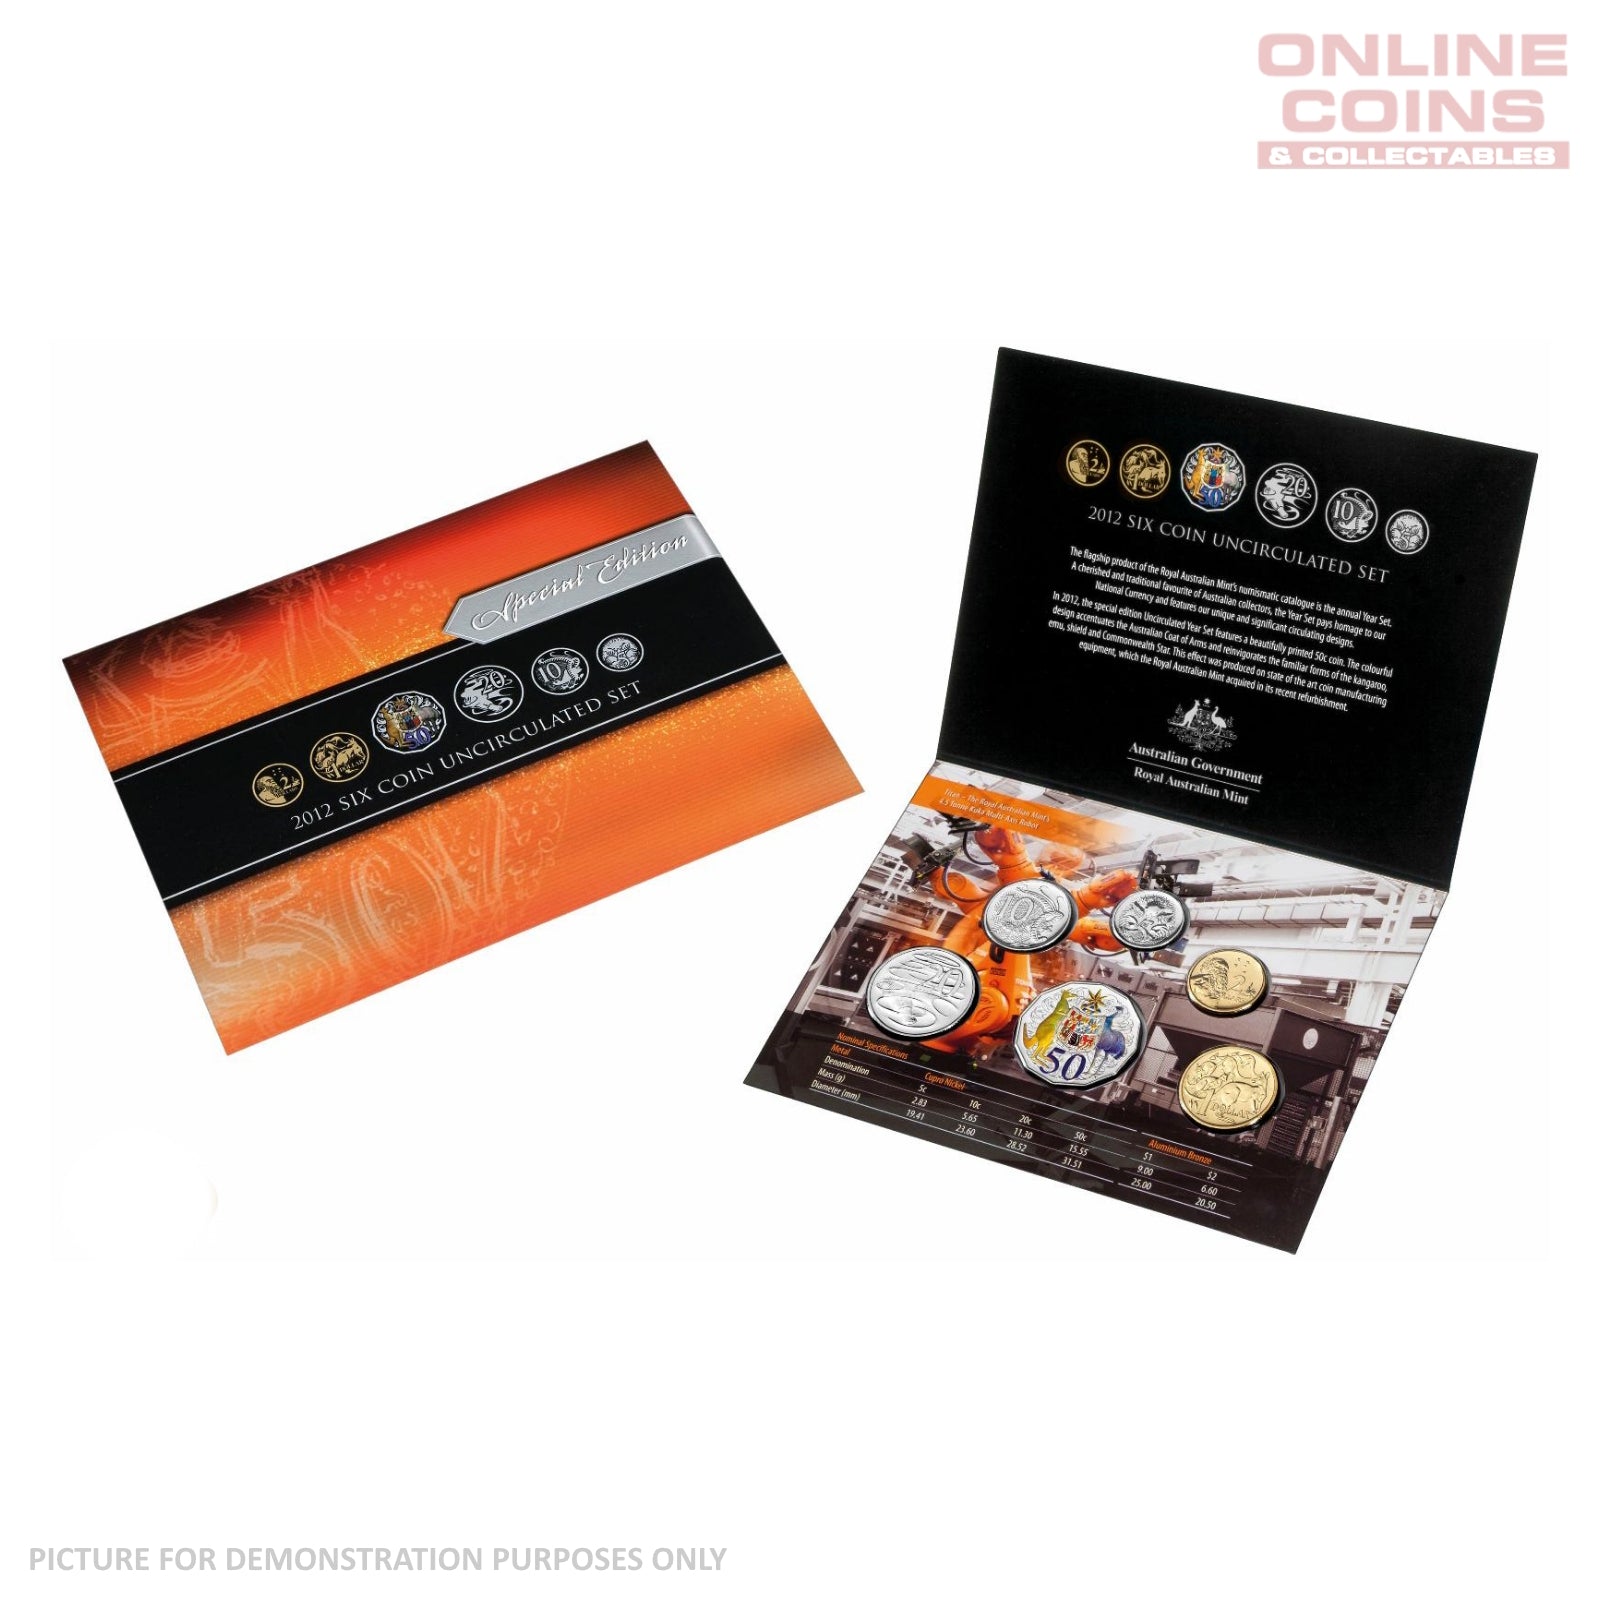 2012 Uncirculated Coin Year Set - Special Edition